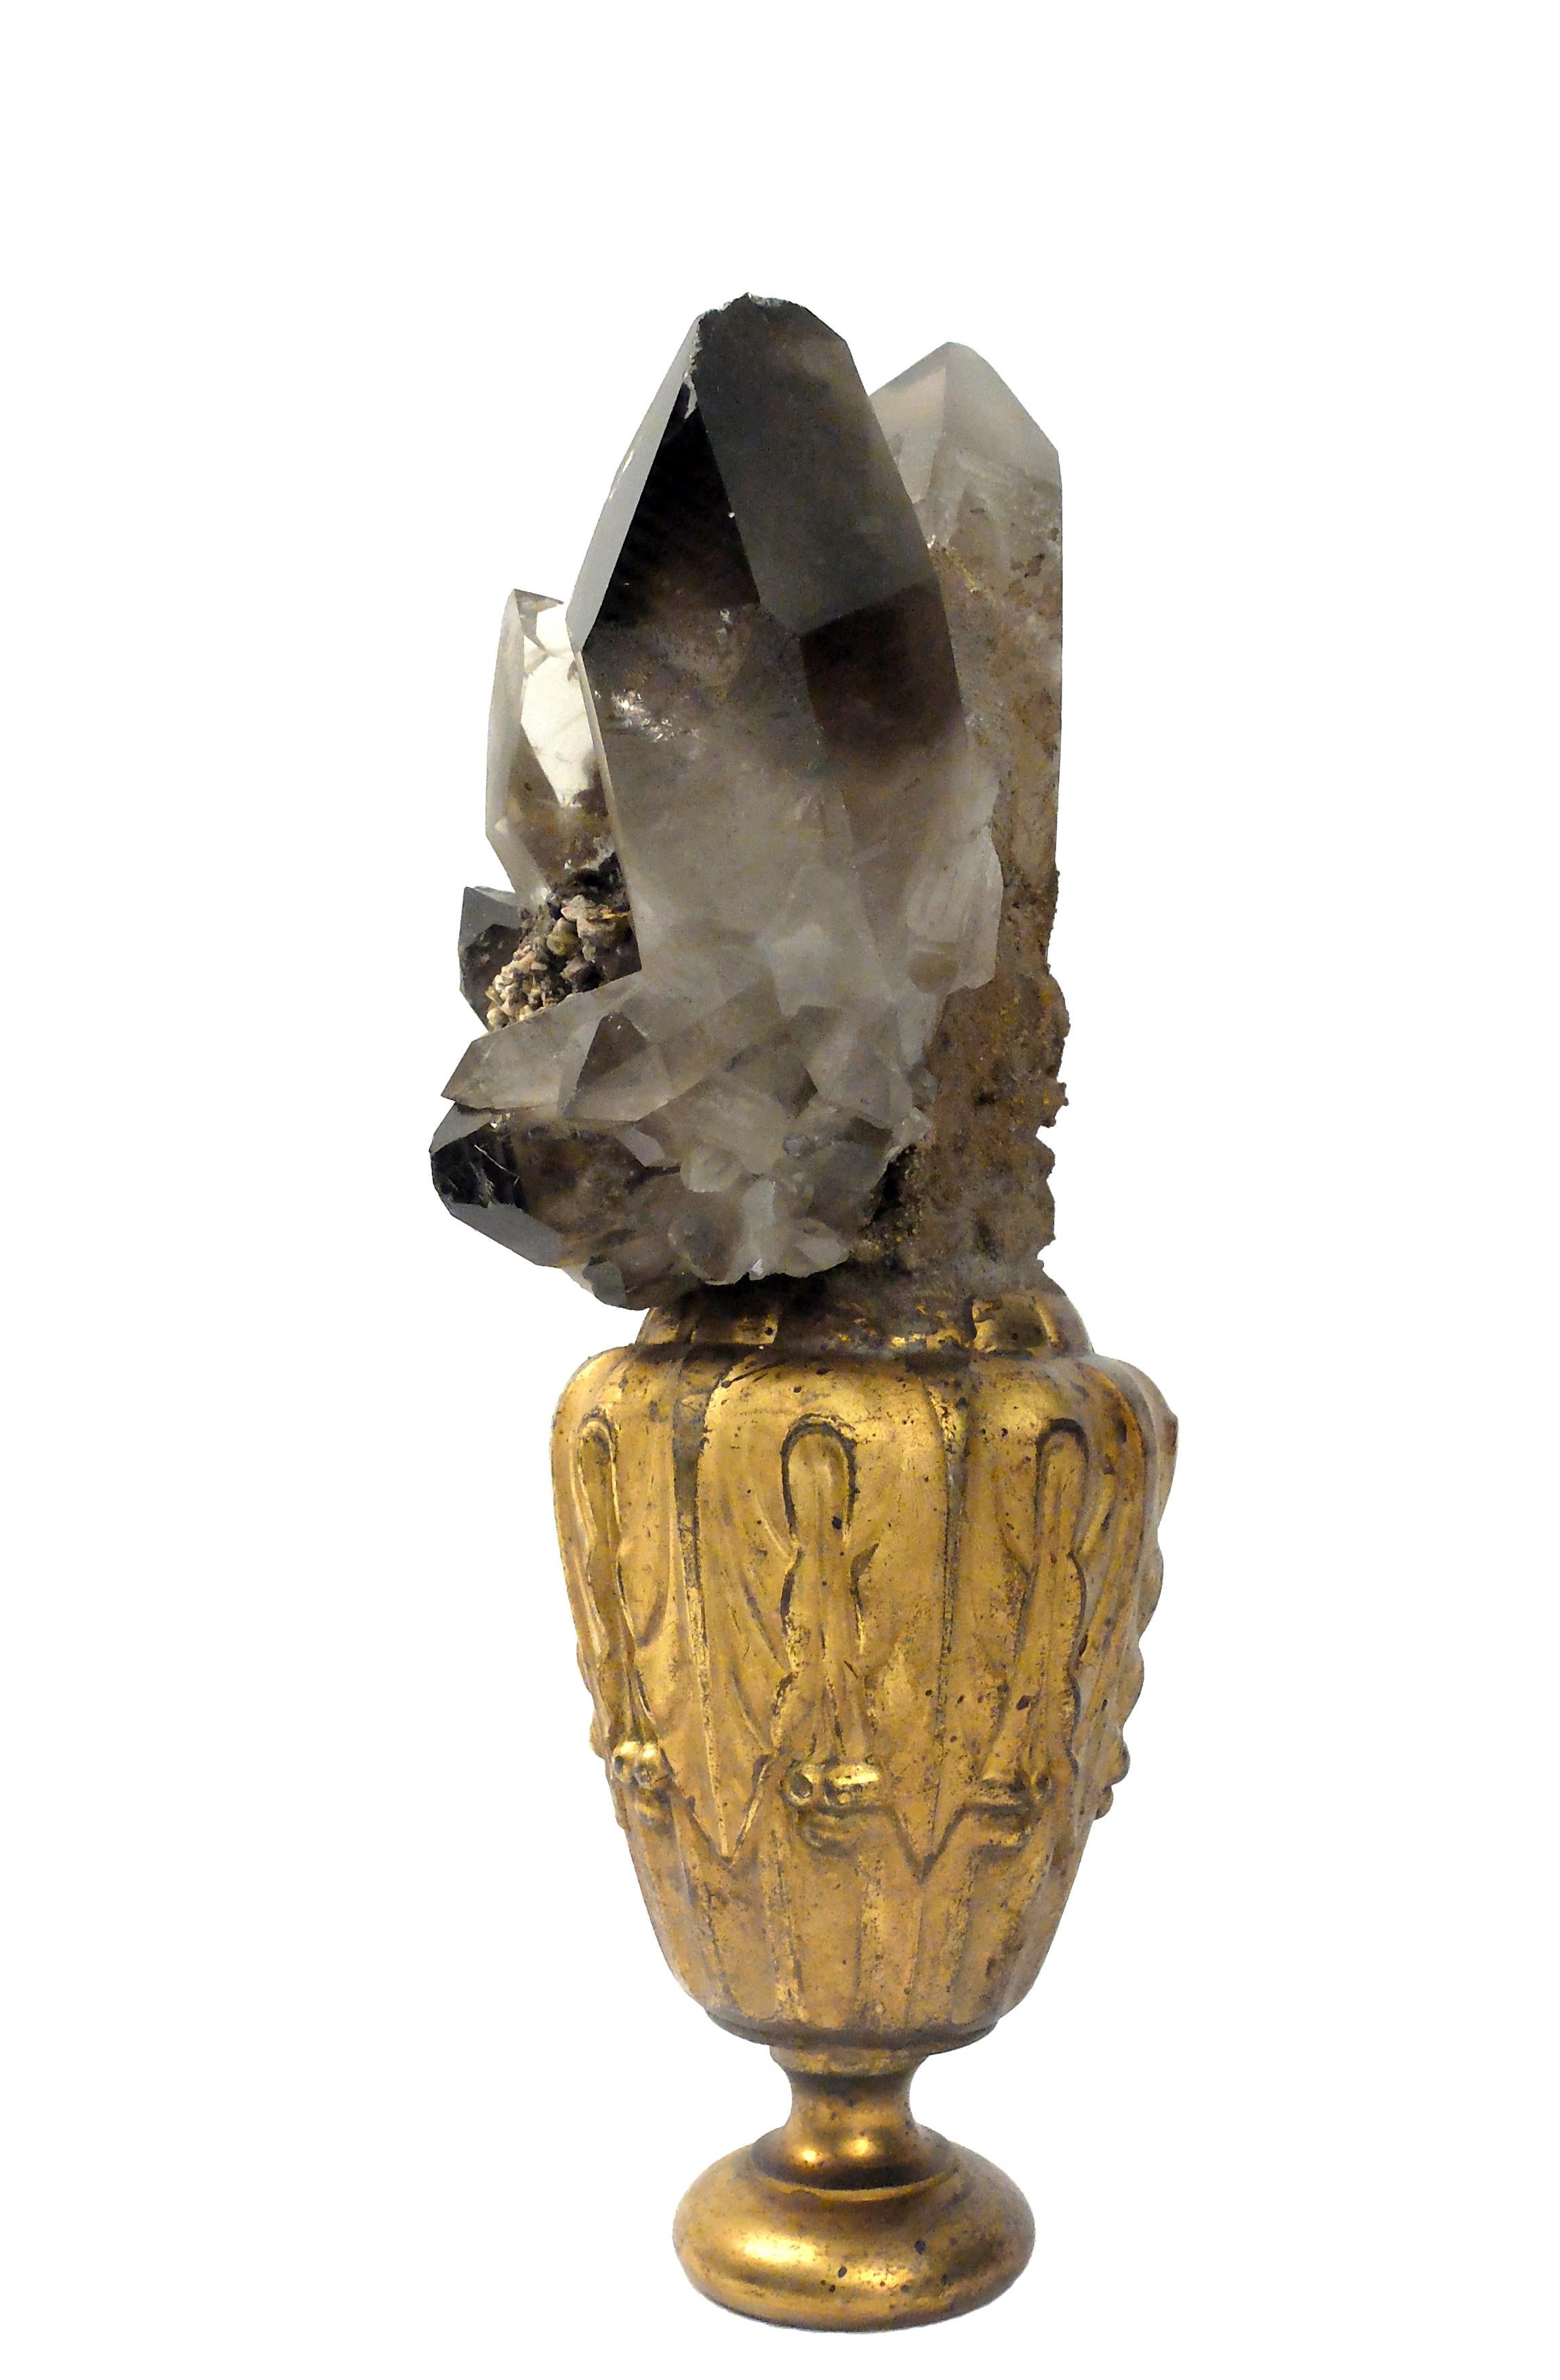 A naturalia mineral specimen: A composition with smoky quartz and axinite crystals, mounted over a guild plated wooden base on a vase shape with leaves decoration.